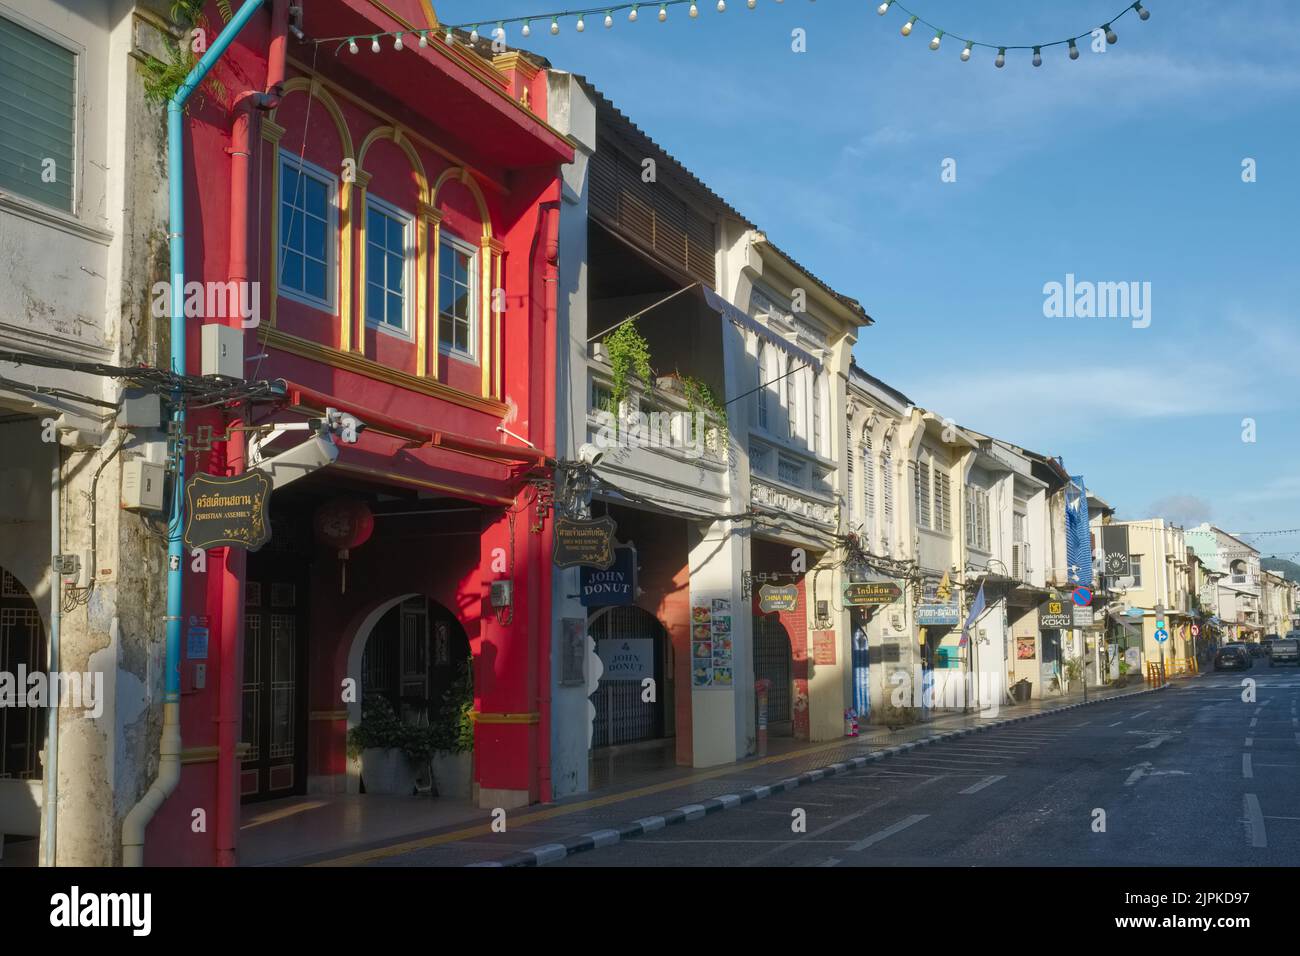 Colourful traditional Sino-Portuguese or Peranakan shophouses in Thalang Road in the Old Town heritage area of Phuket Town, Thailand Stock Photo